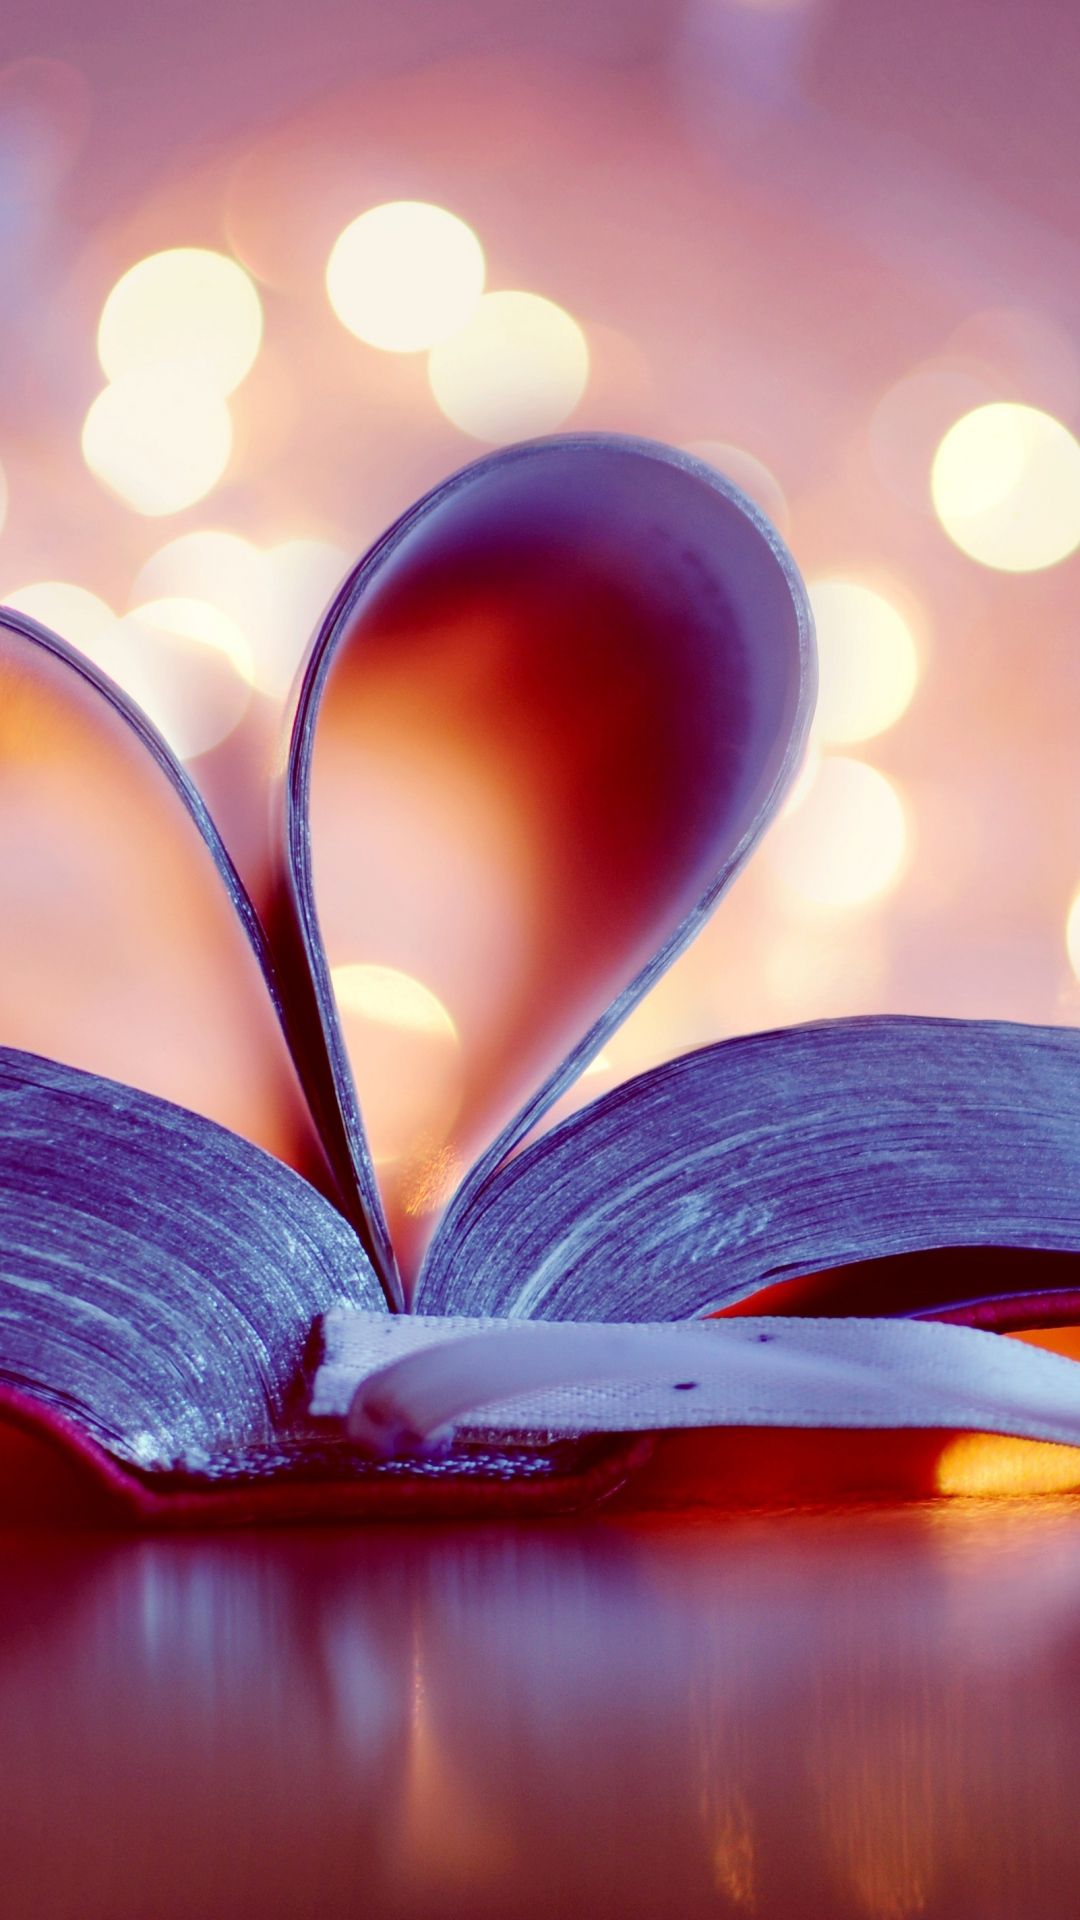 Book Love Heart Bokeh Android Wallpaper free download